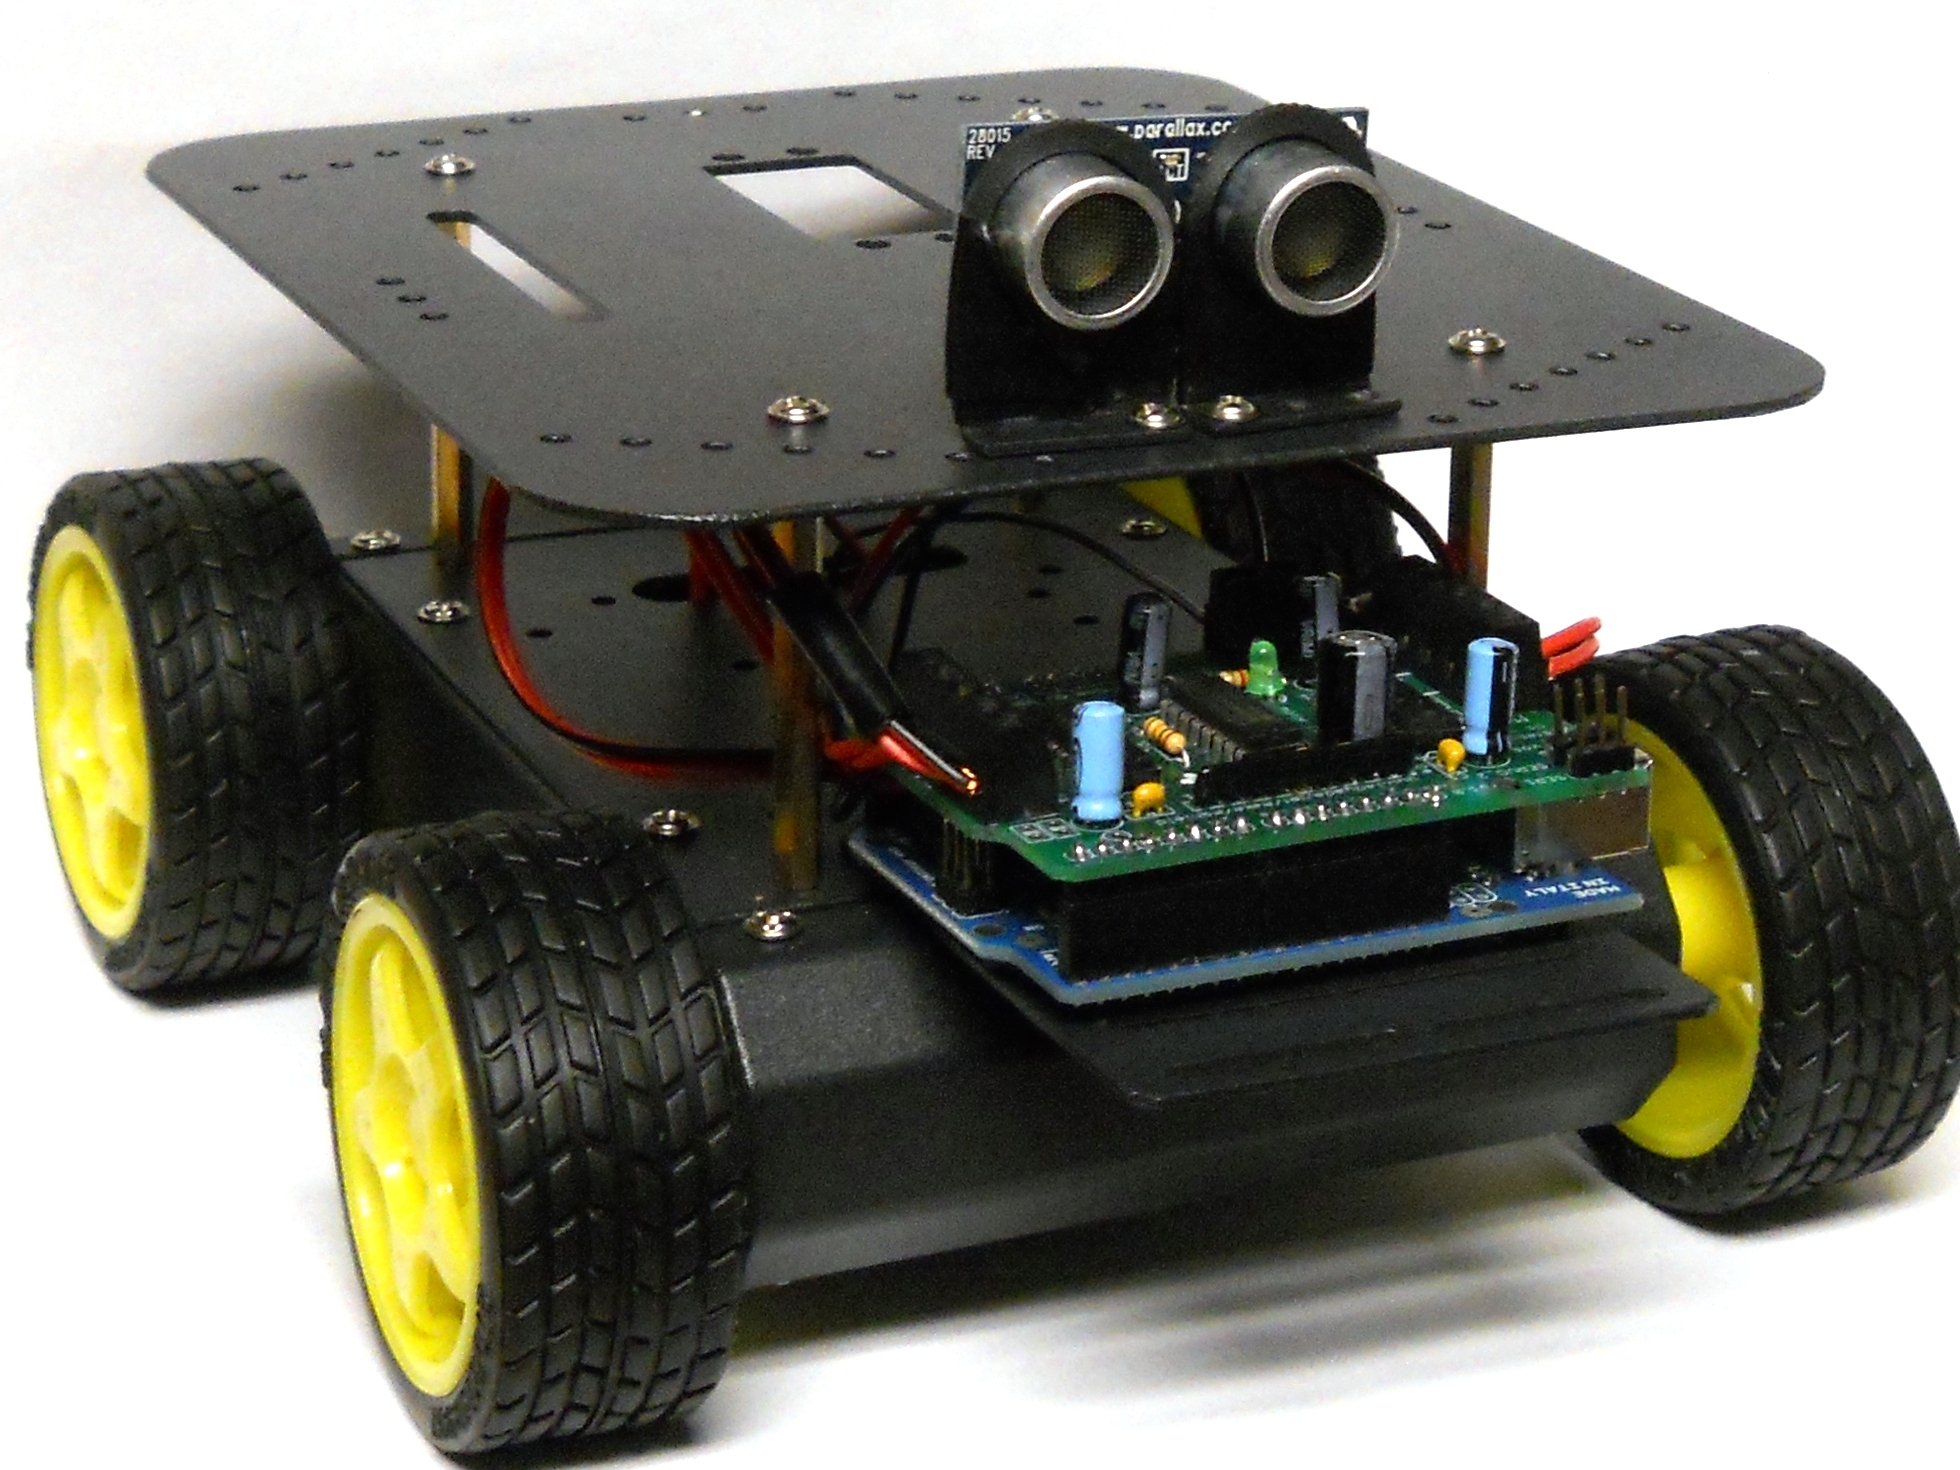 Build your own Arduino-Controlled Robot!